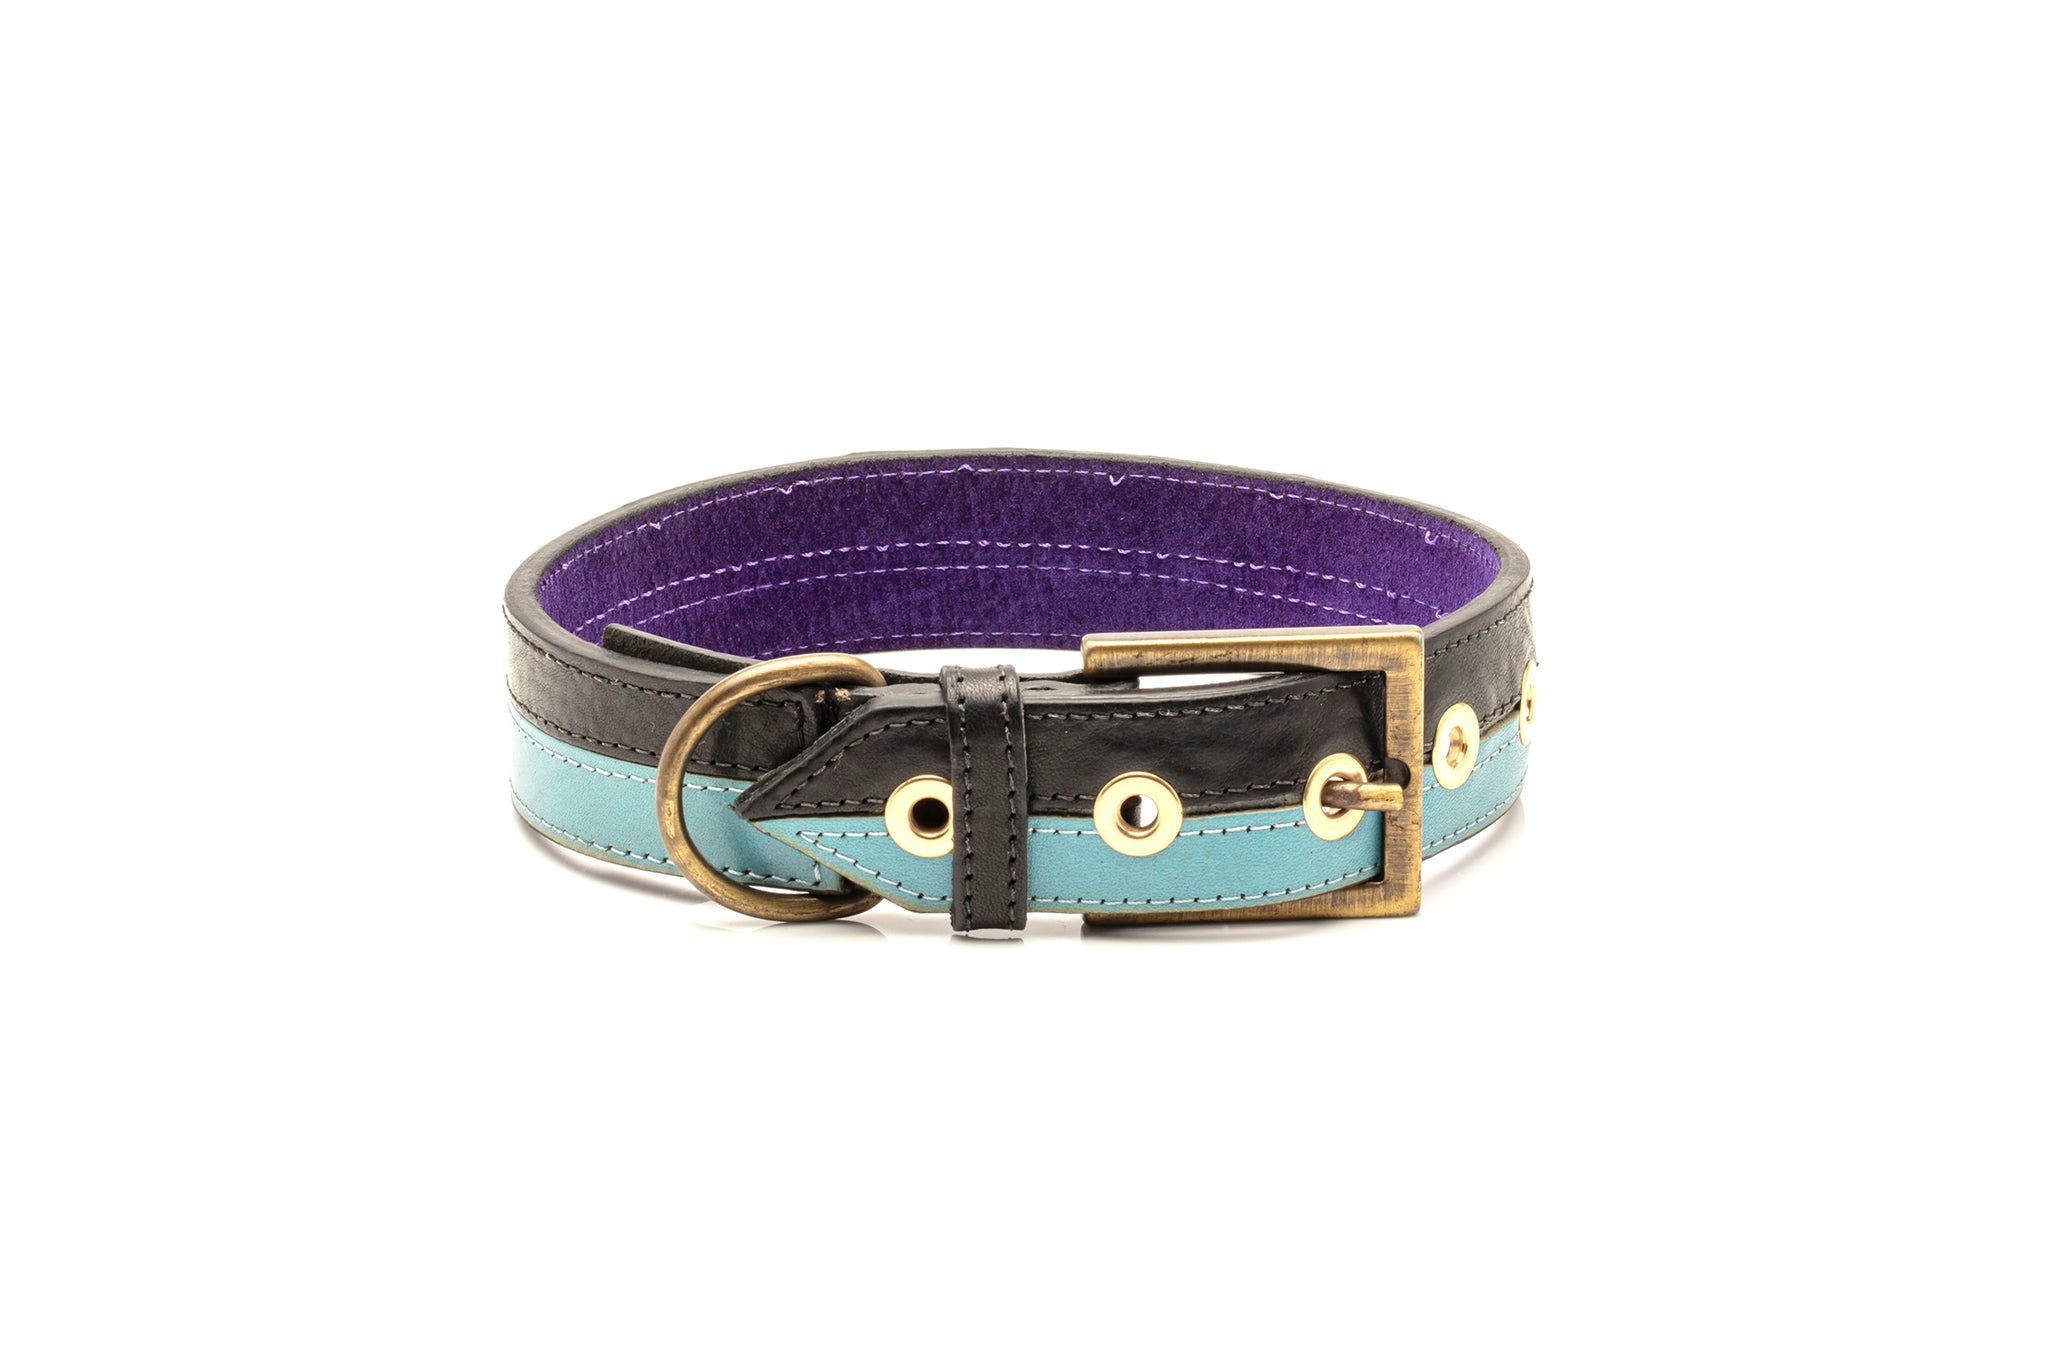 TWO-TONE CONTRAST LEATHER COLLAR IN  YUCATAN BLACK & TURQUOISE BLUE